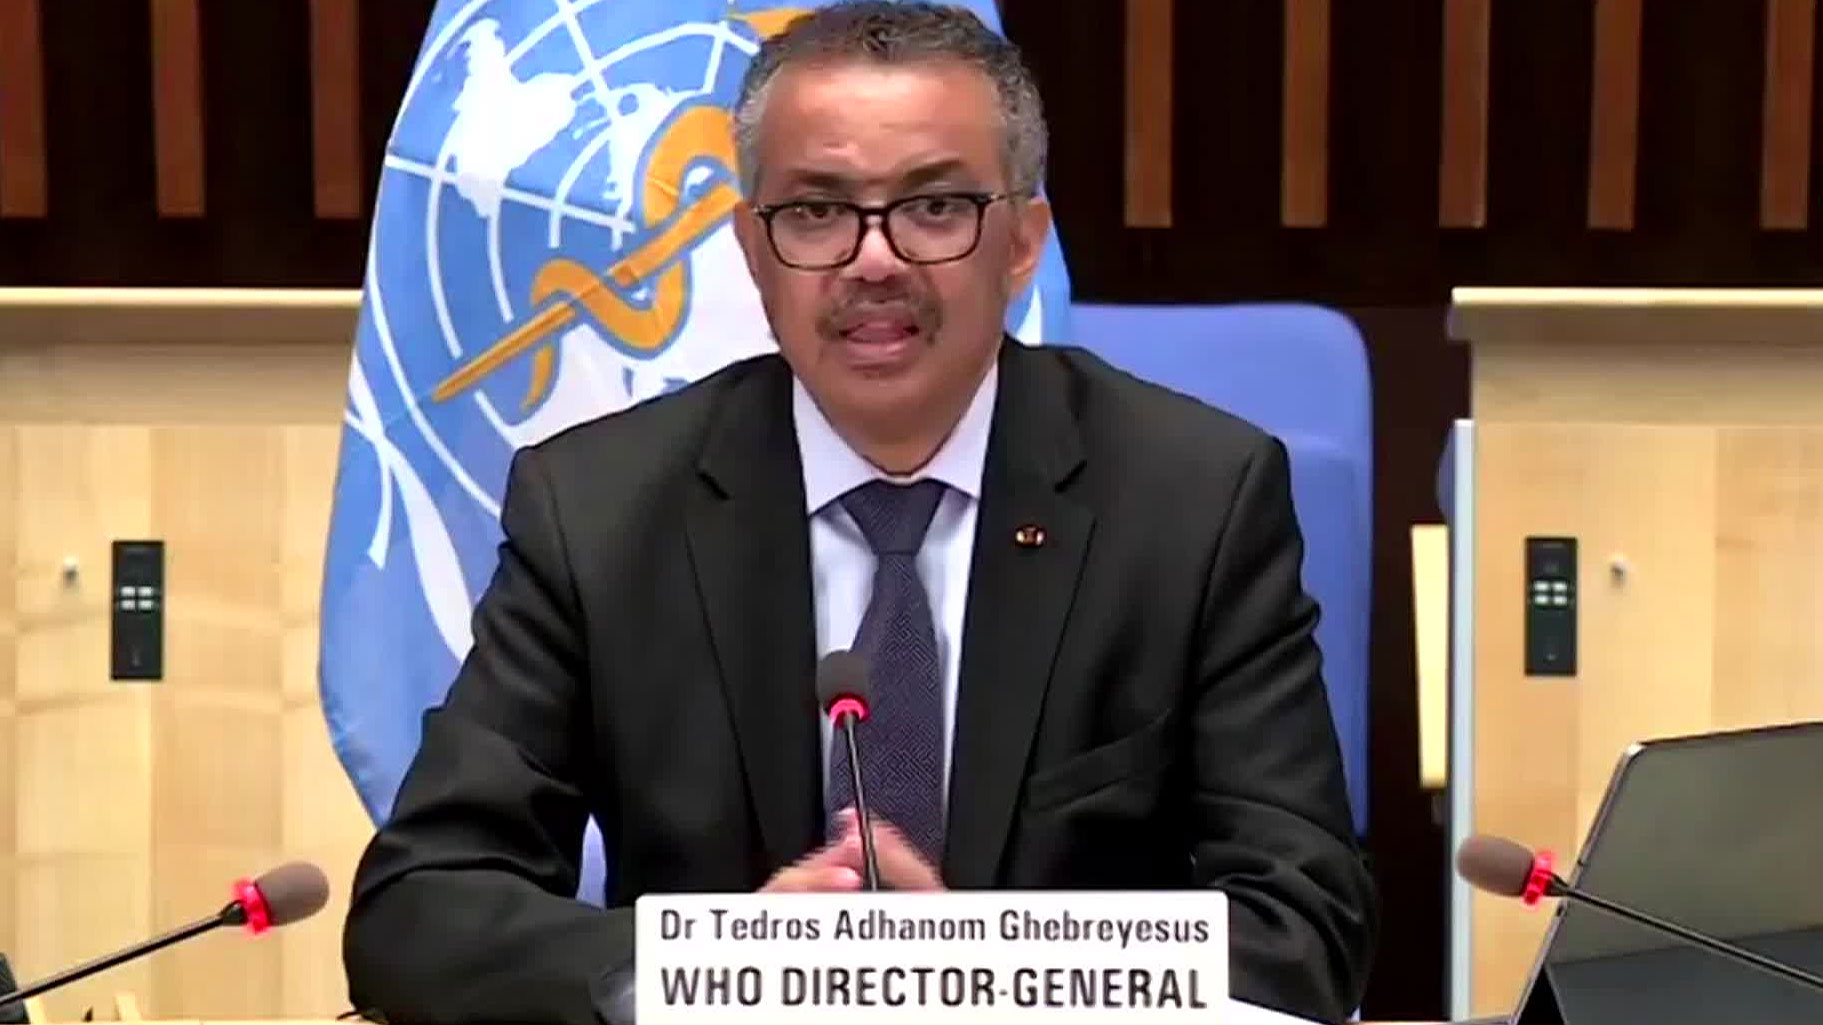 Tedros Adhanom Ghebreyesus, the director-general of the World Health Organization, speaks during a news conference on Thursday.